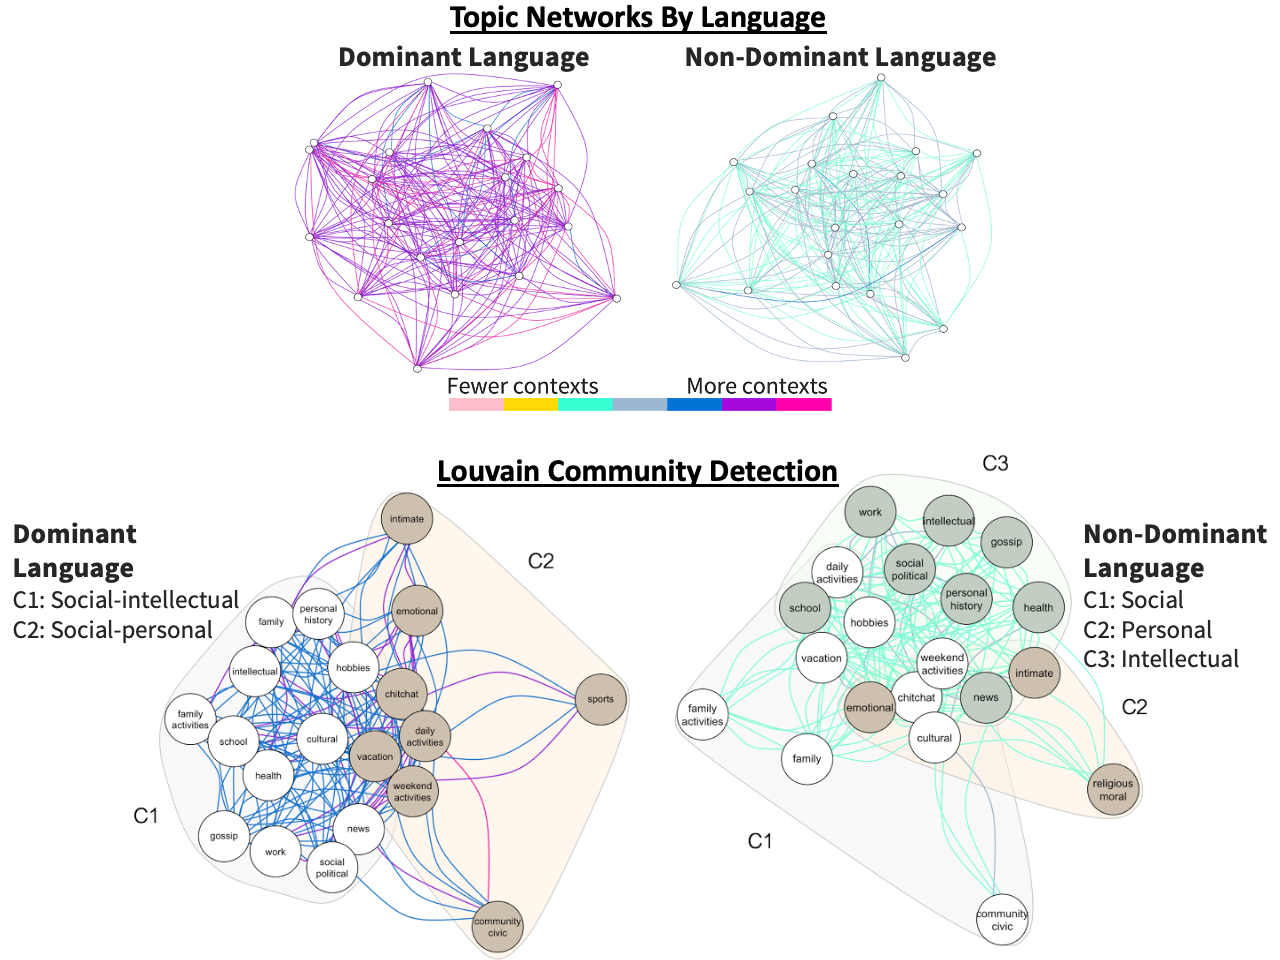 topic networks and communities by language (dominant vs. non-dominant) for bilinguals in montreal. networks for the dominant language are larger and have fewer communities. networks for the non-dominant language are smaller but have more communities.